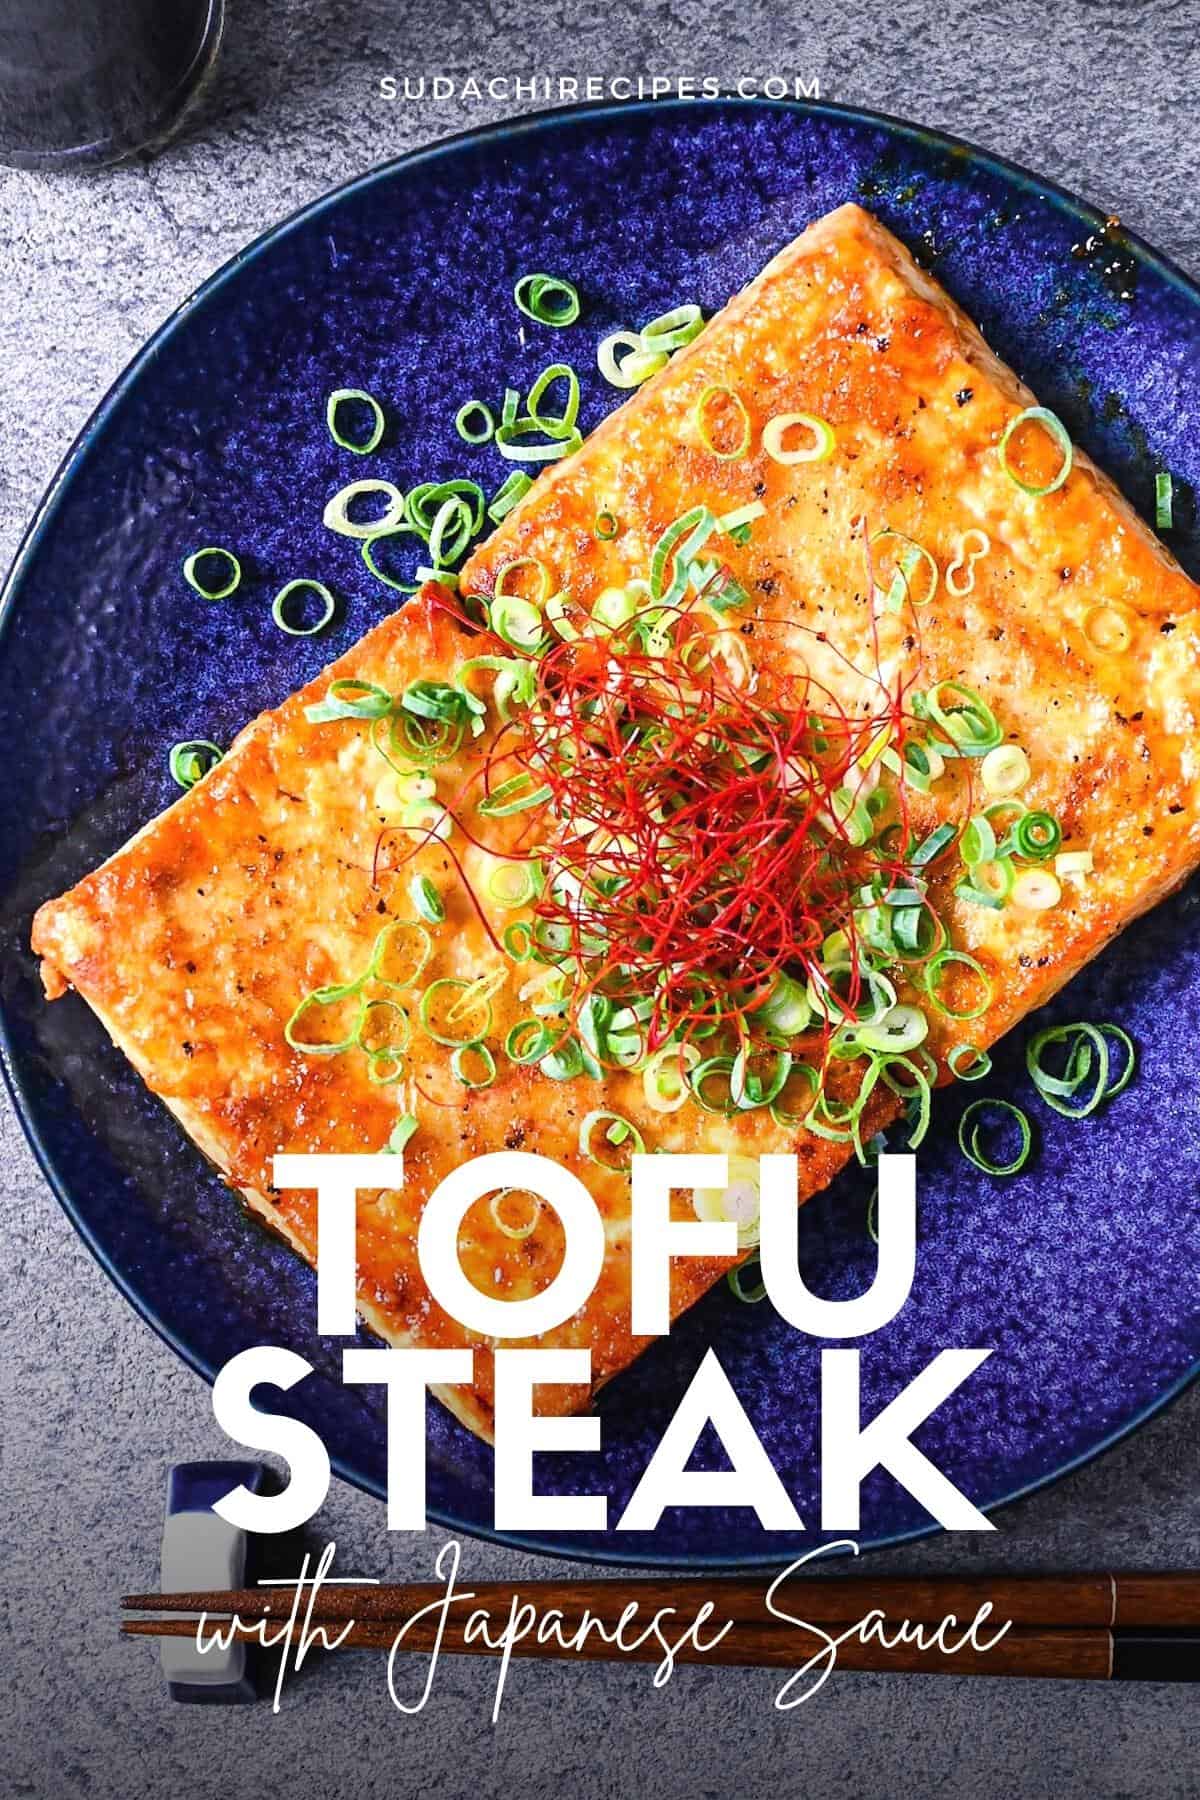 Tofu steak coated in a Japanese style sauce topped with spring onion and chili threads on a blue plate